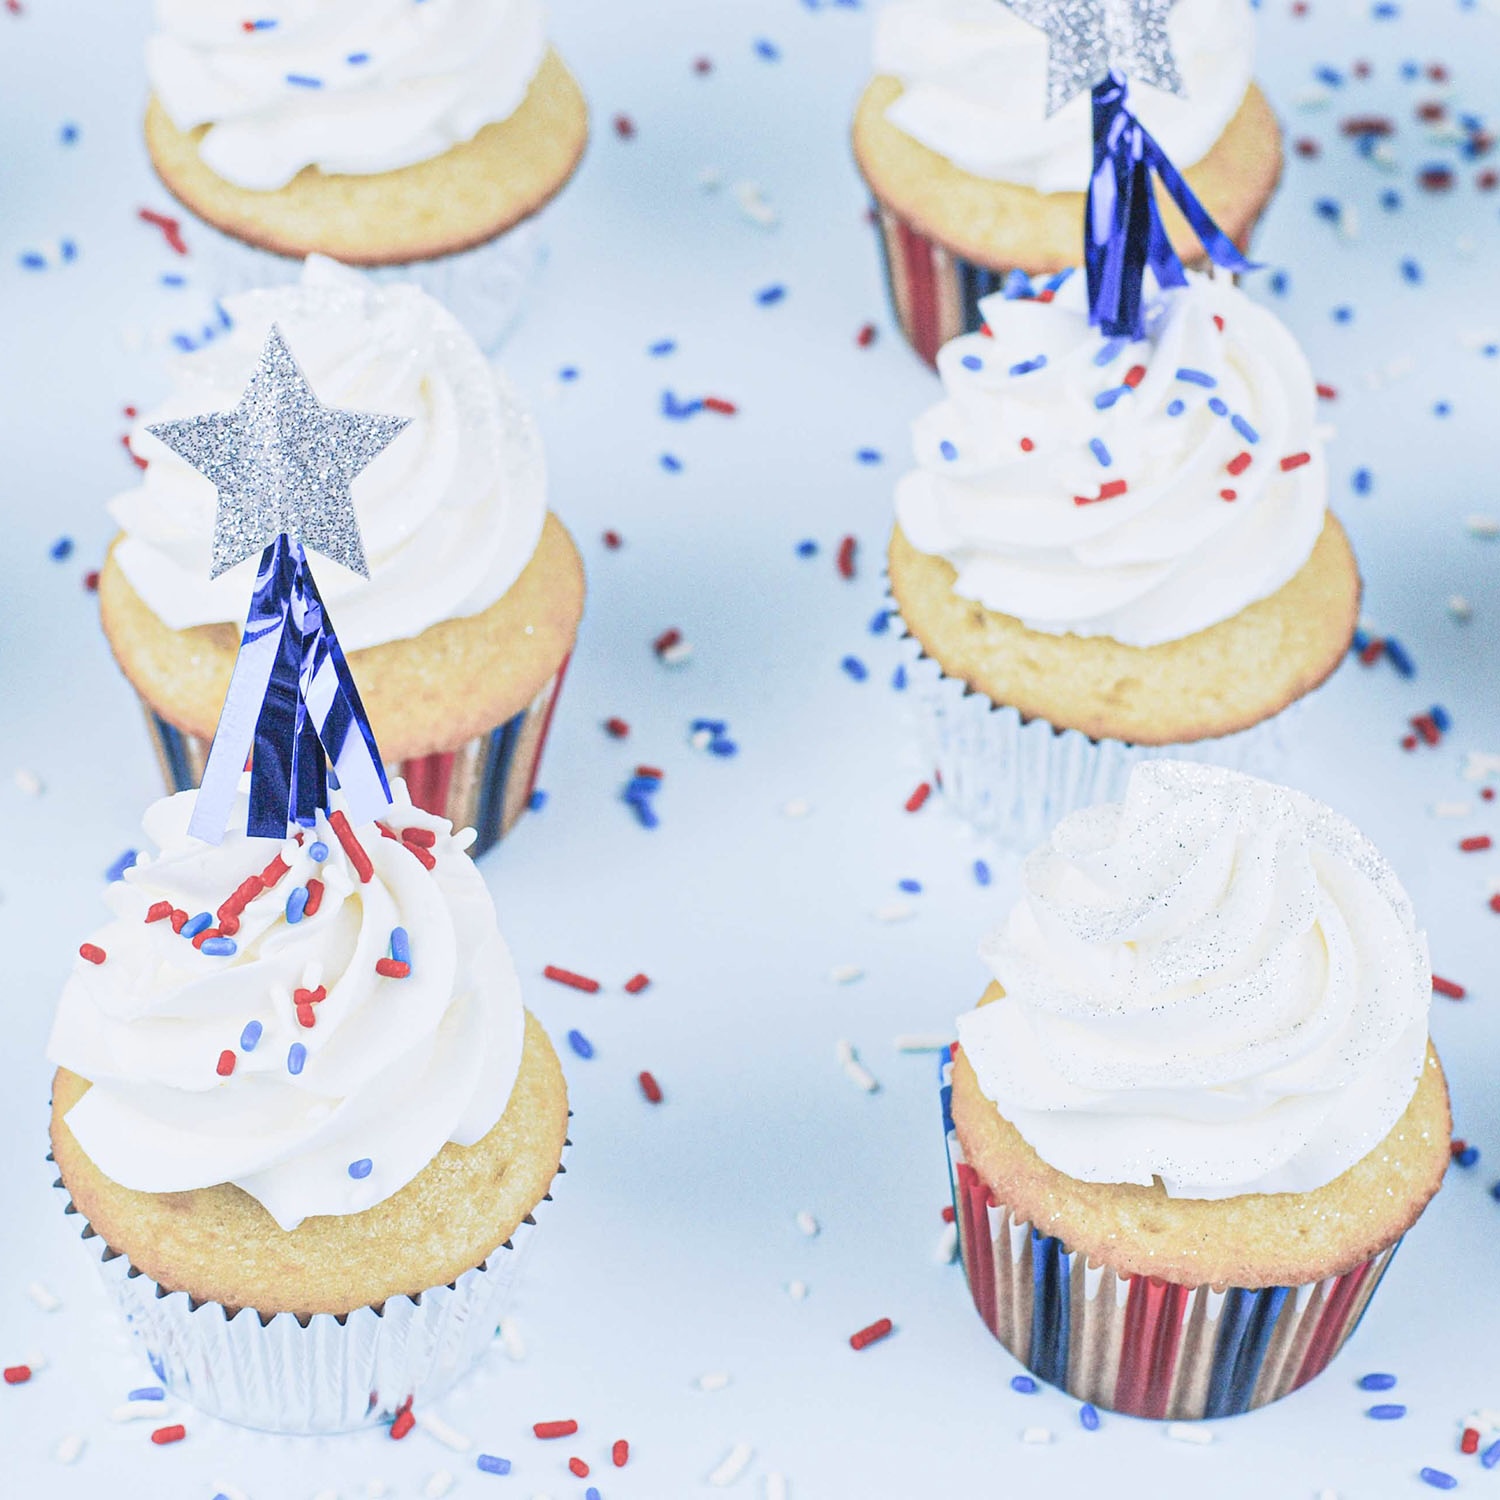  white cake baked in Stars and Stripes Cupcake liners with shooting star picks with a dash of sprinkles and silver sparkly dust.